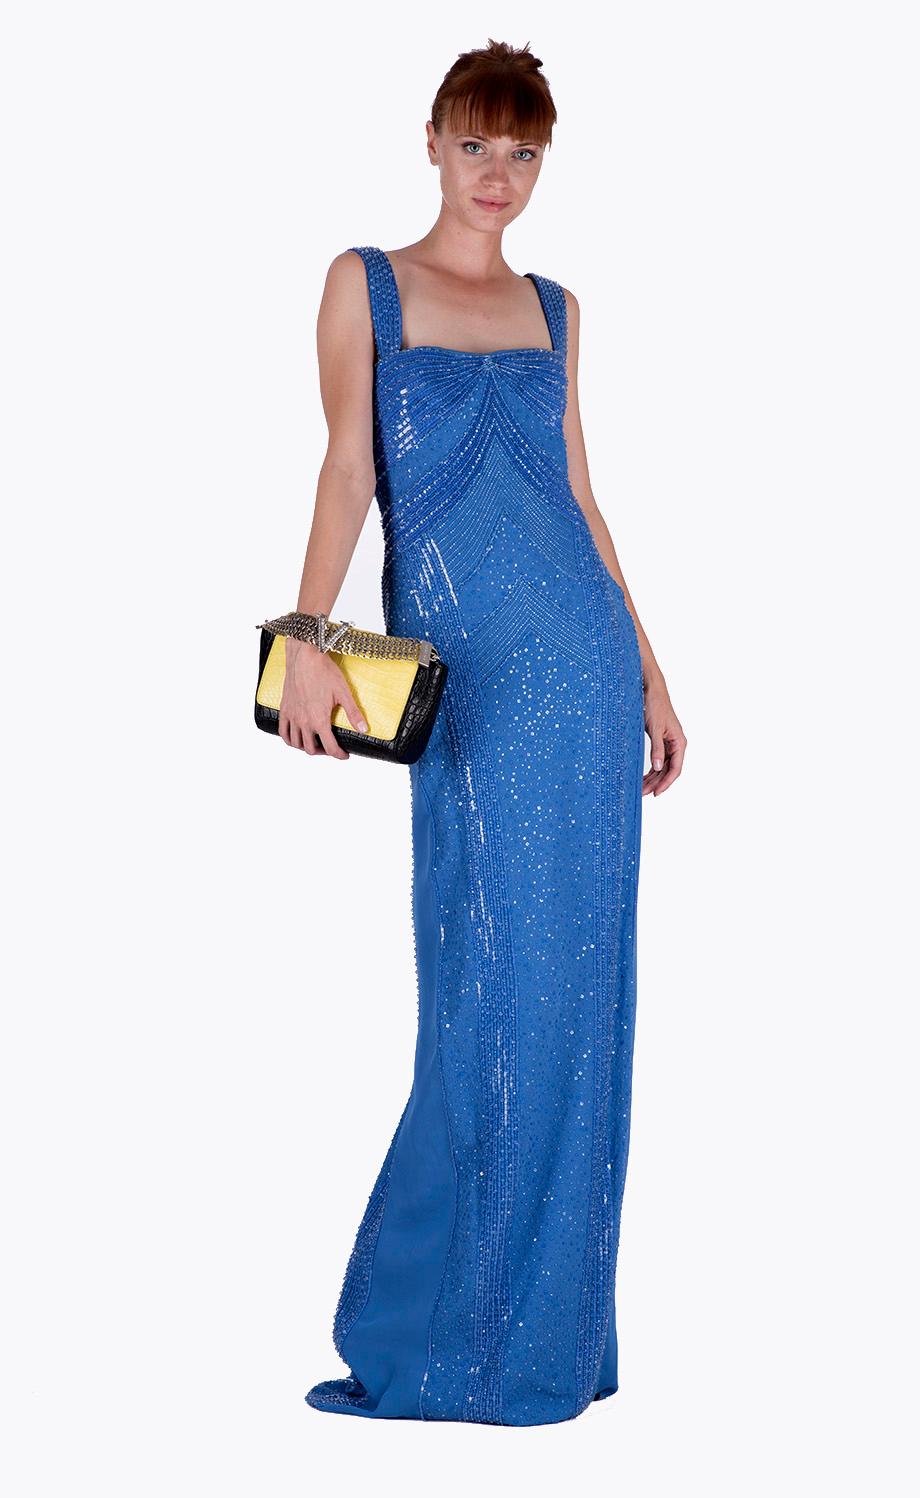 VERSACE 



Versace's eveningwear is exquisite. 


This blue gown has been beautifully embellished with beads and sequins.
Inner corset


Content:100% Viscose, 
Lining 100% Silk



IT Size: 44 - US 8
armpit to armpit 22